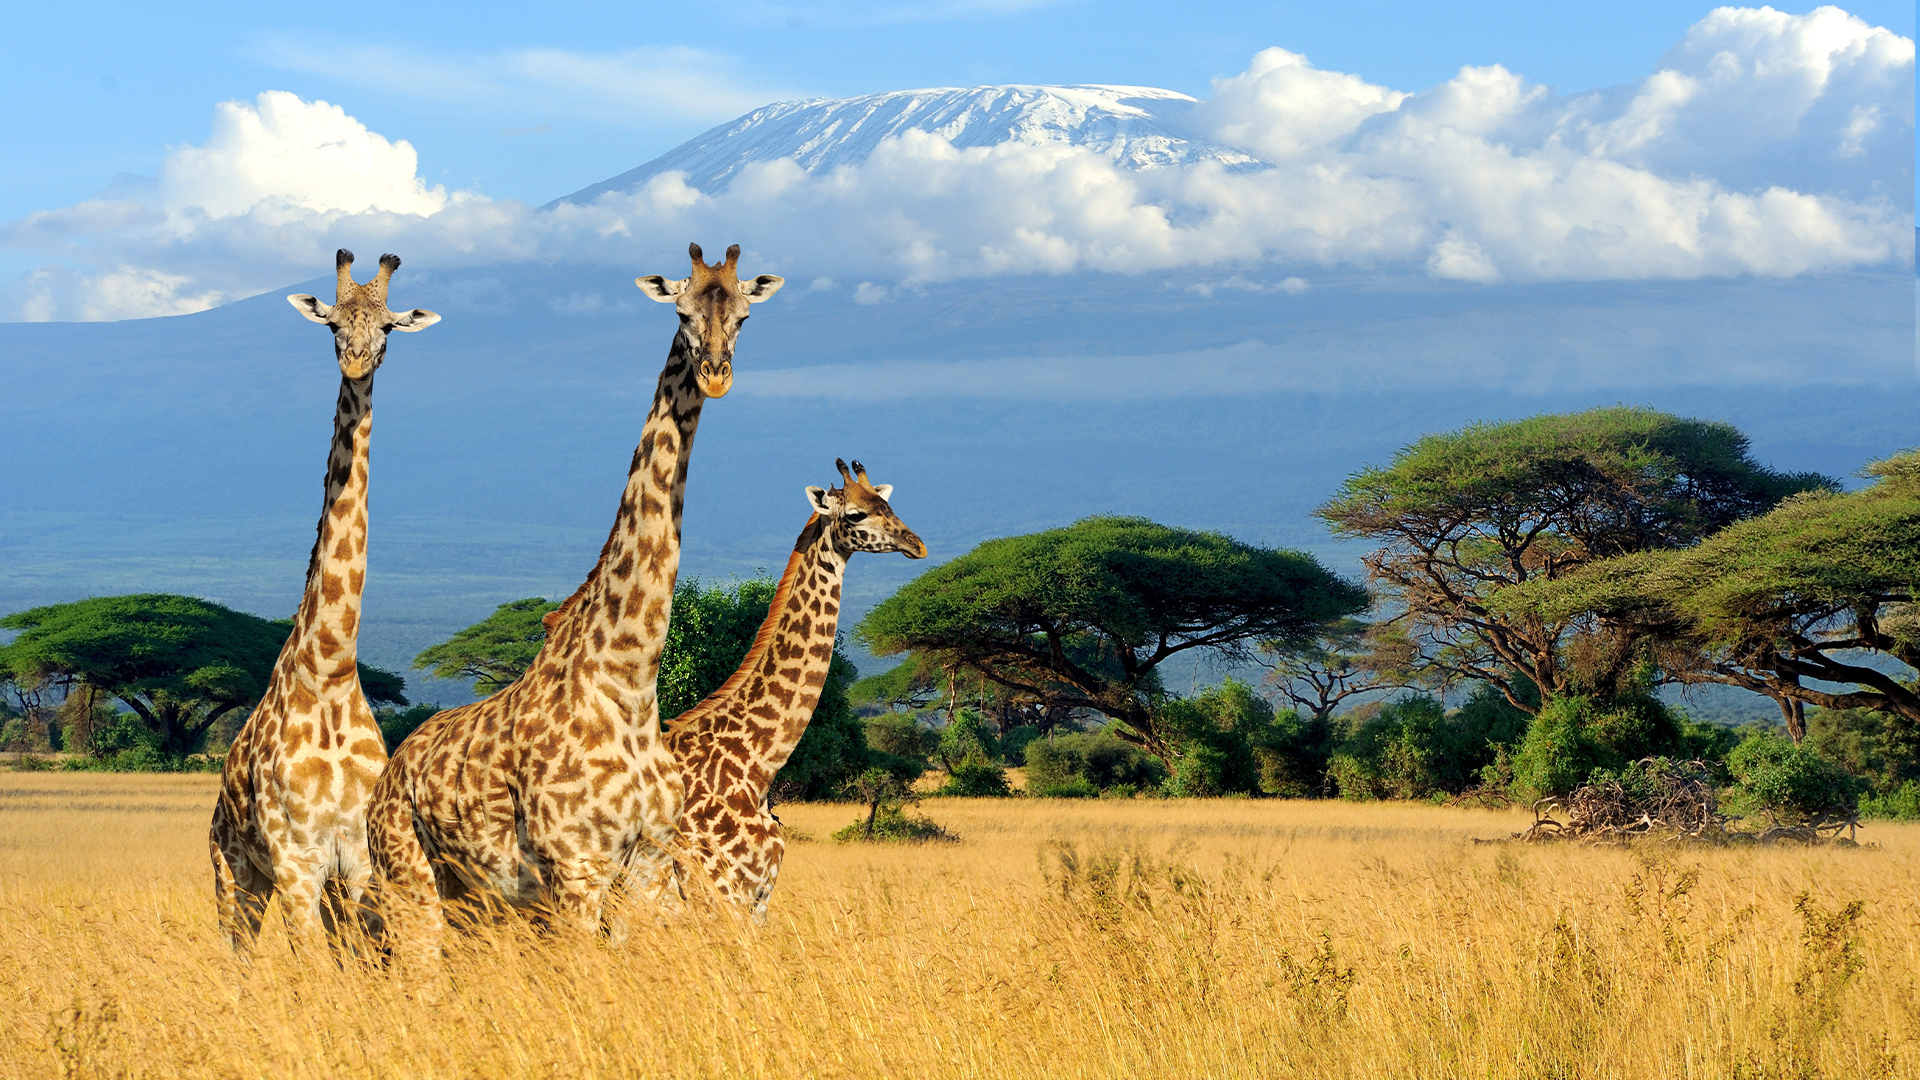 Destinations: Three Giraffe stood in Tall Grass in Kenya National Park, with Mount Kilimanjaro in the background, Kenya, Africa